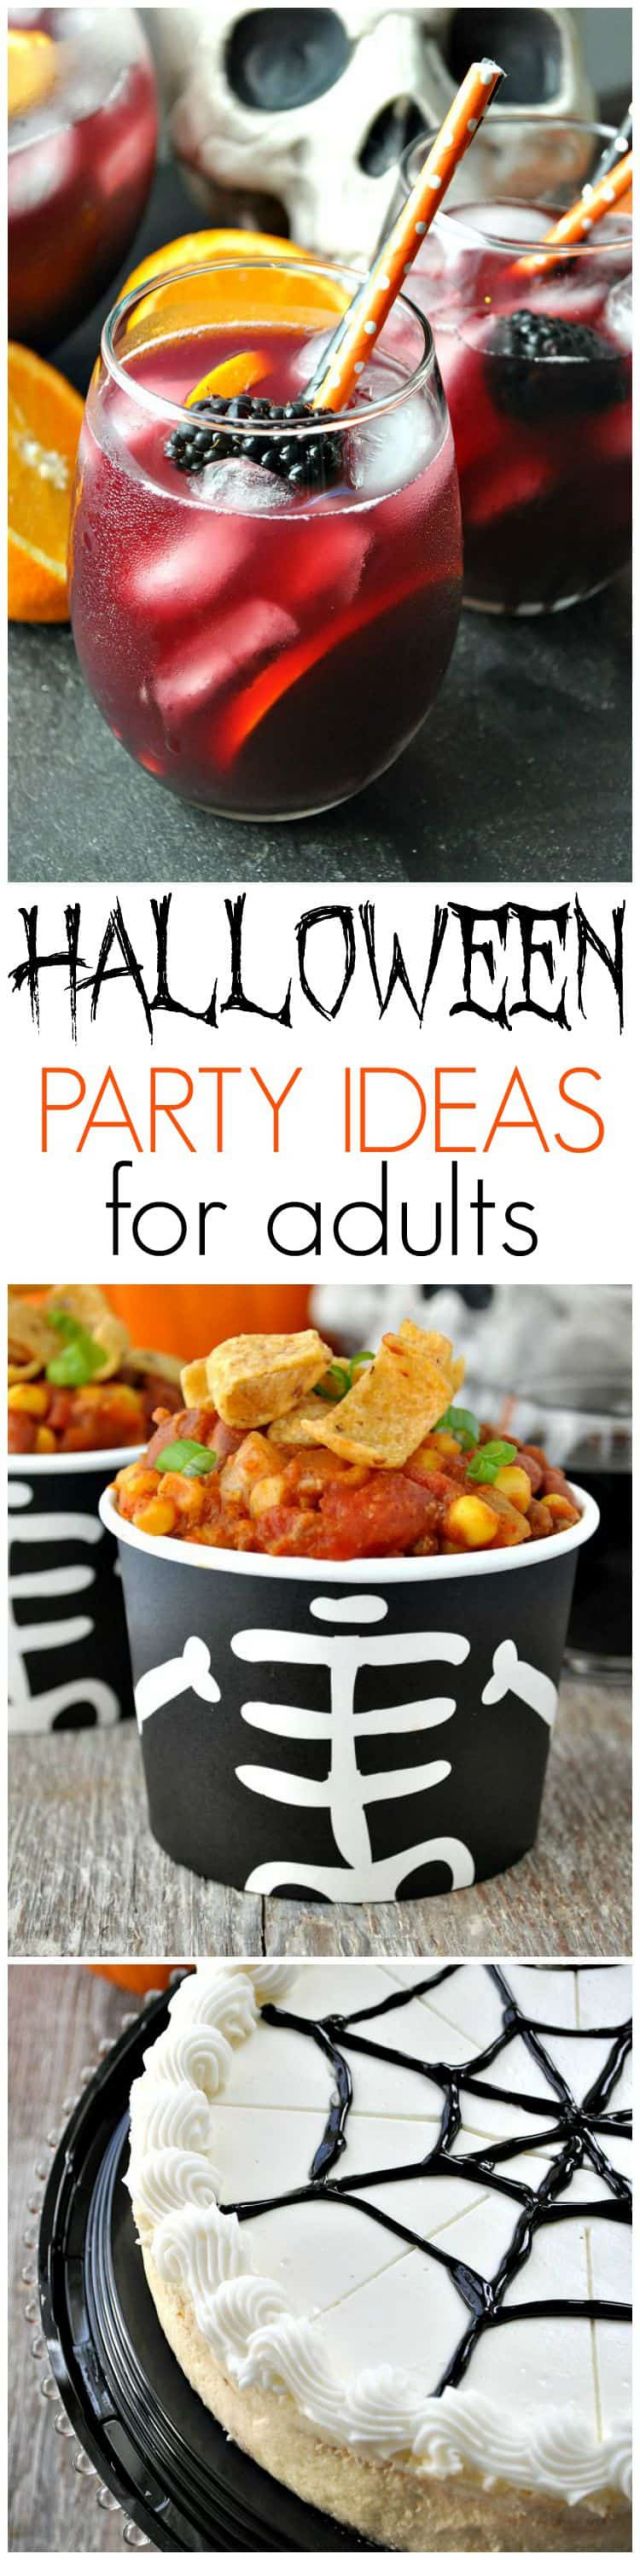 Halloween Theme Party Ideas For Adults
 Slow Cooker Pumpkin Chili Halloween Party Ideas for